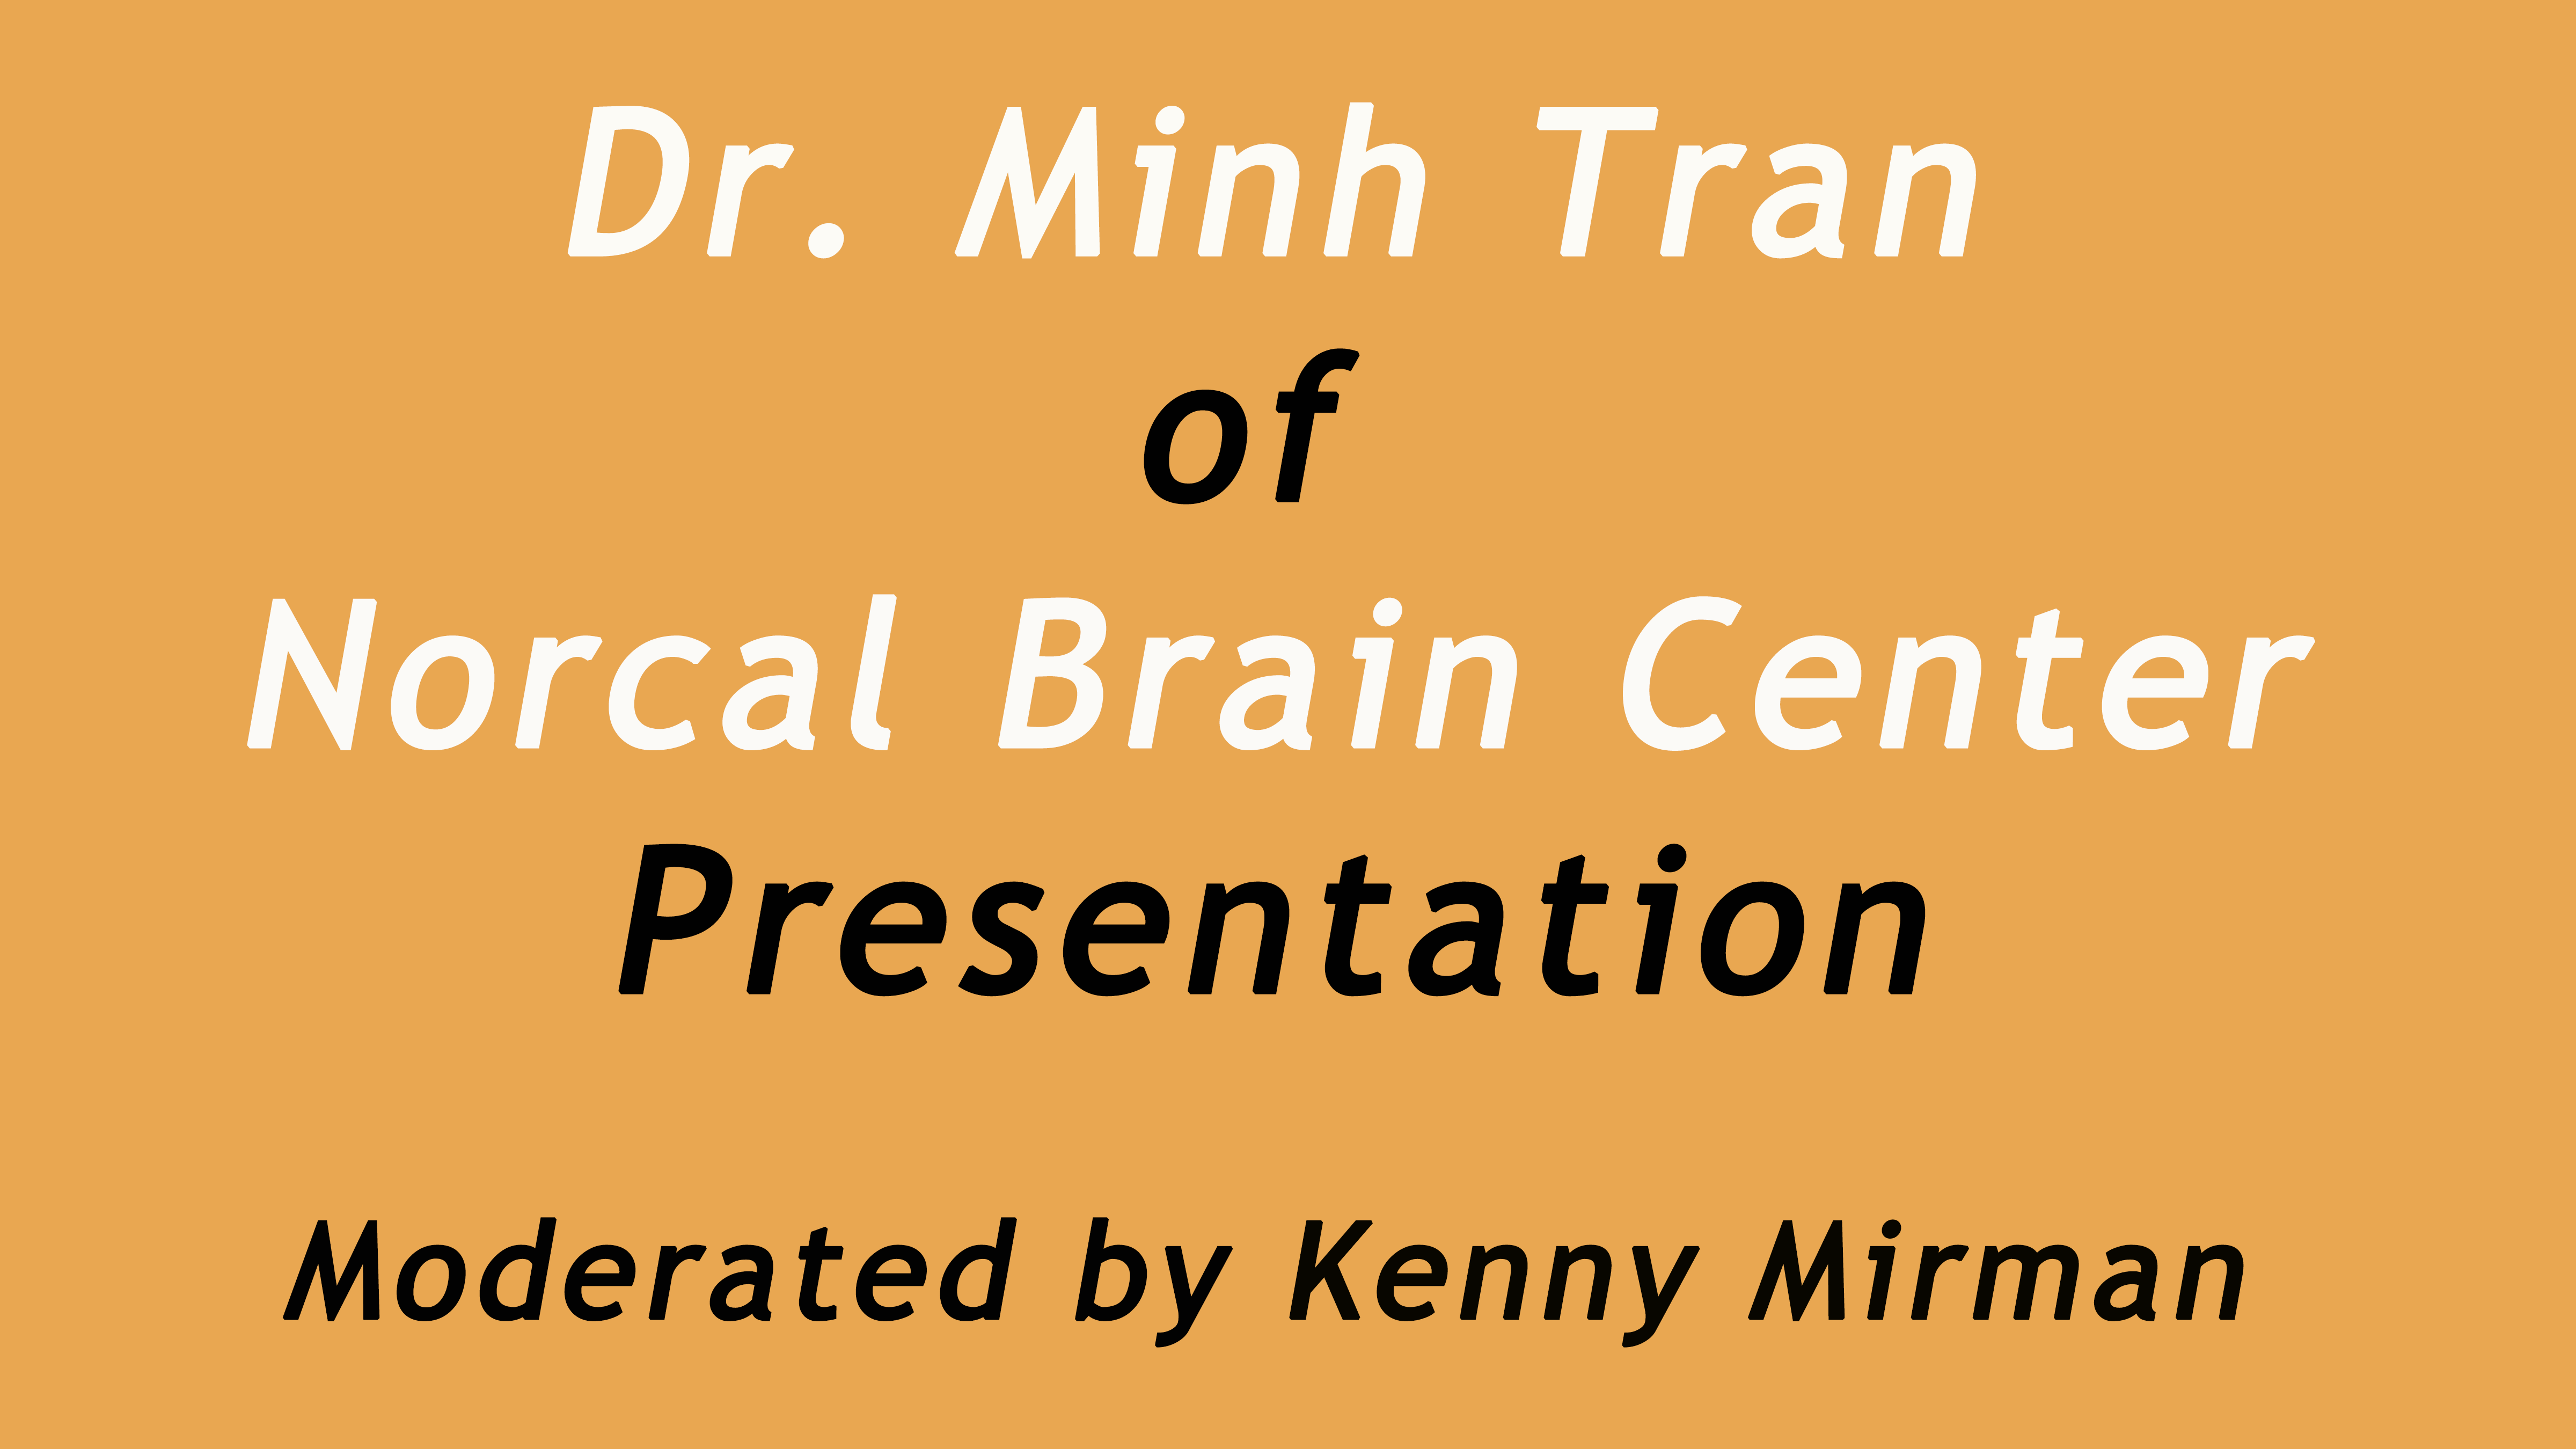 Dr. Minh Tran of Norcal Brain Center, facilitated by Kenny Mirman